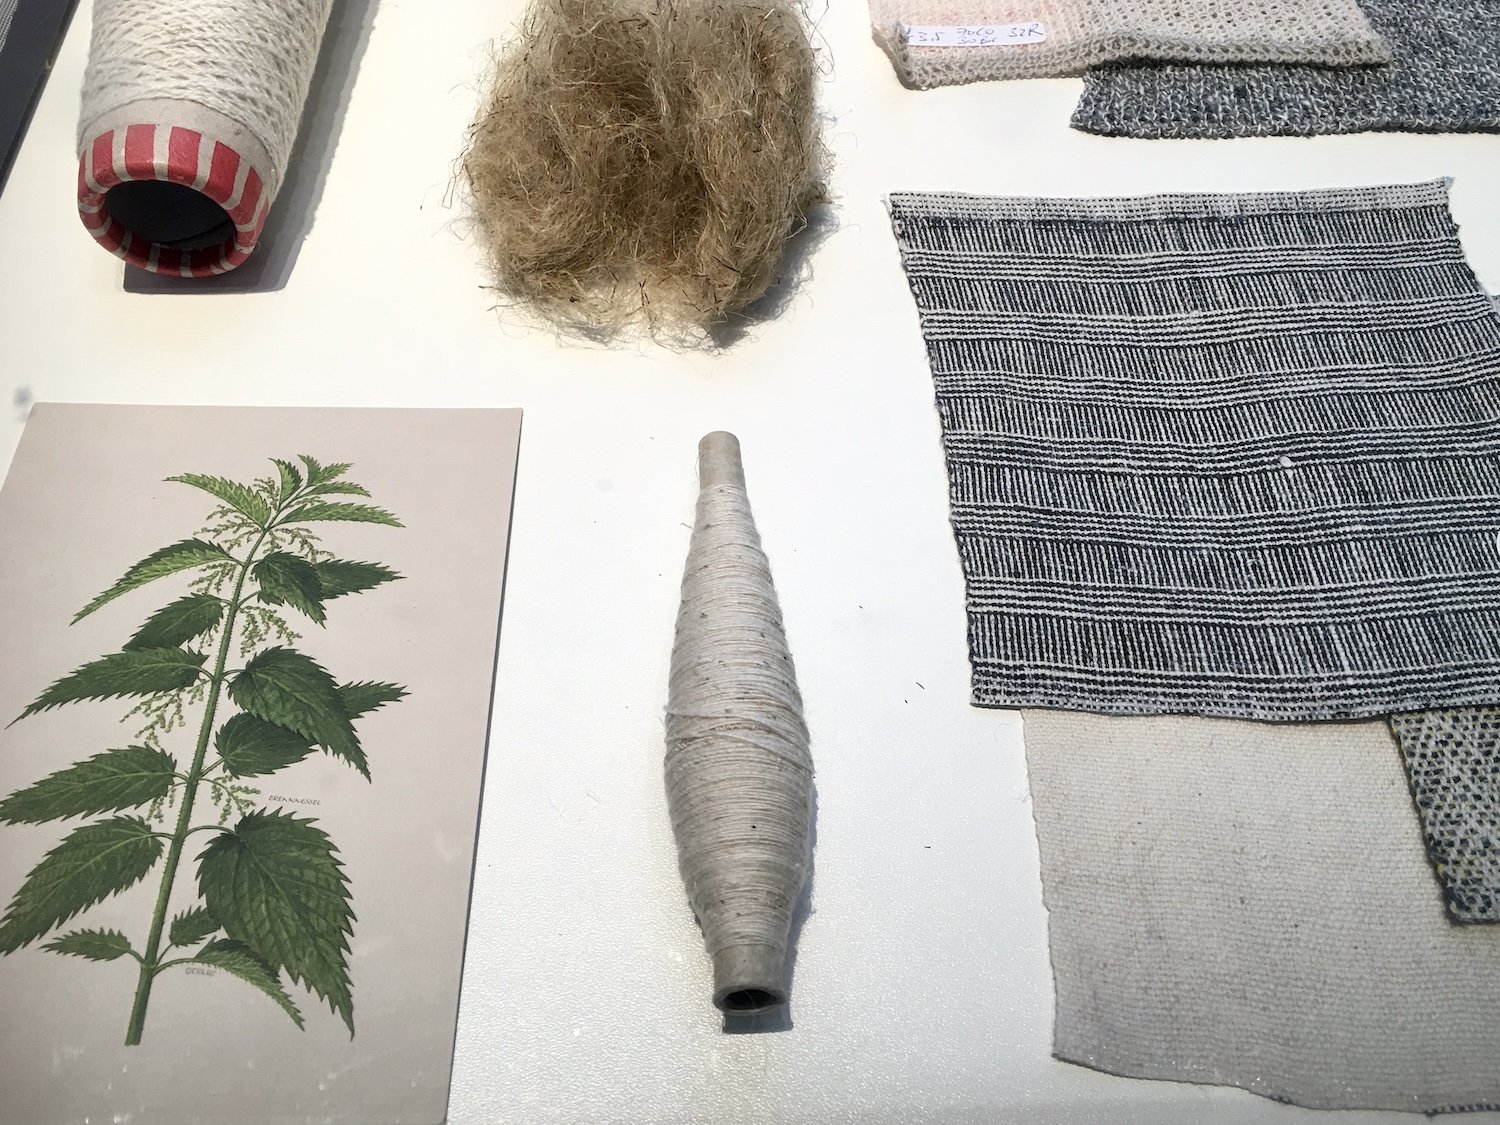 The SpinLab at Lucern School of Design, Film and Art showcased their SwissNettle Textile research, looking at the potential of the large stinging nettle in yarn and twine and textiles. © Marie O’Mahony